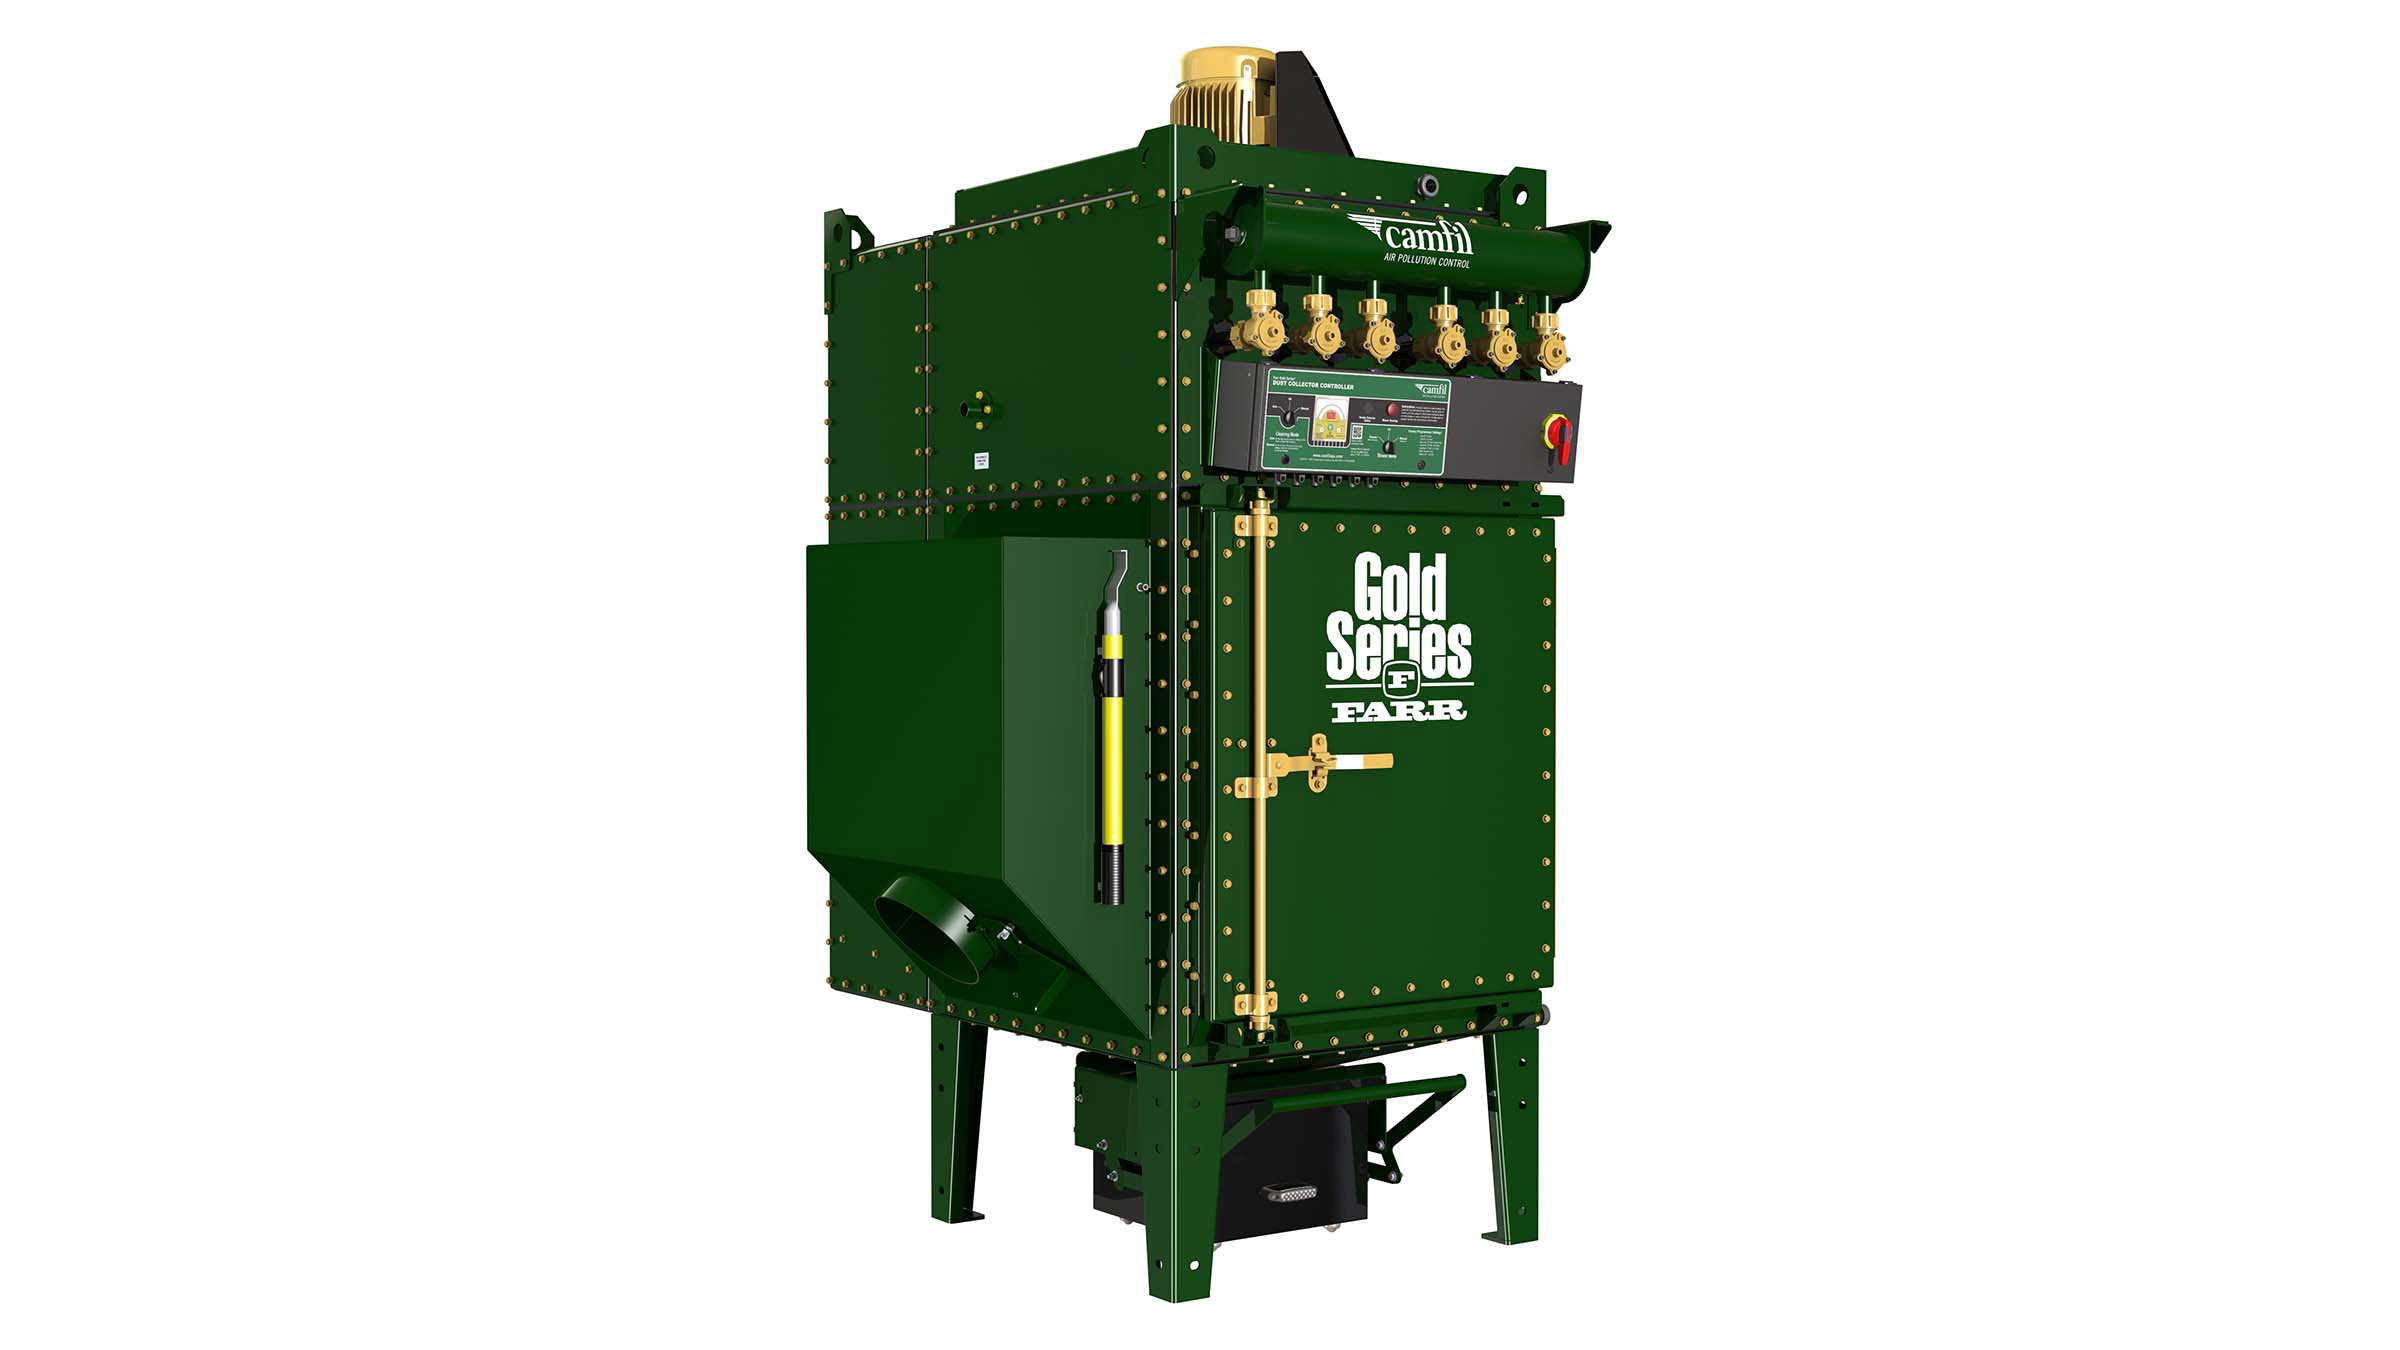 Carr Gold Series Camfil dust collection machine